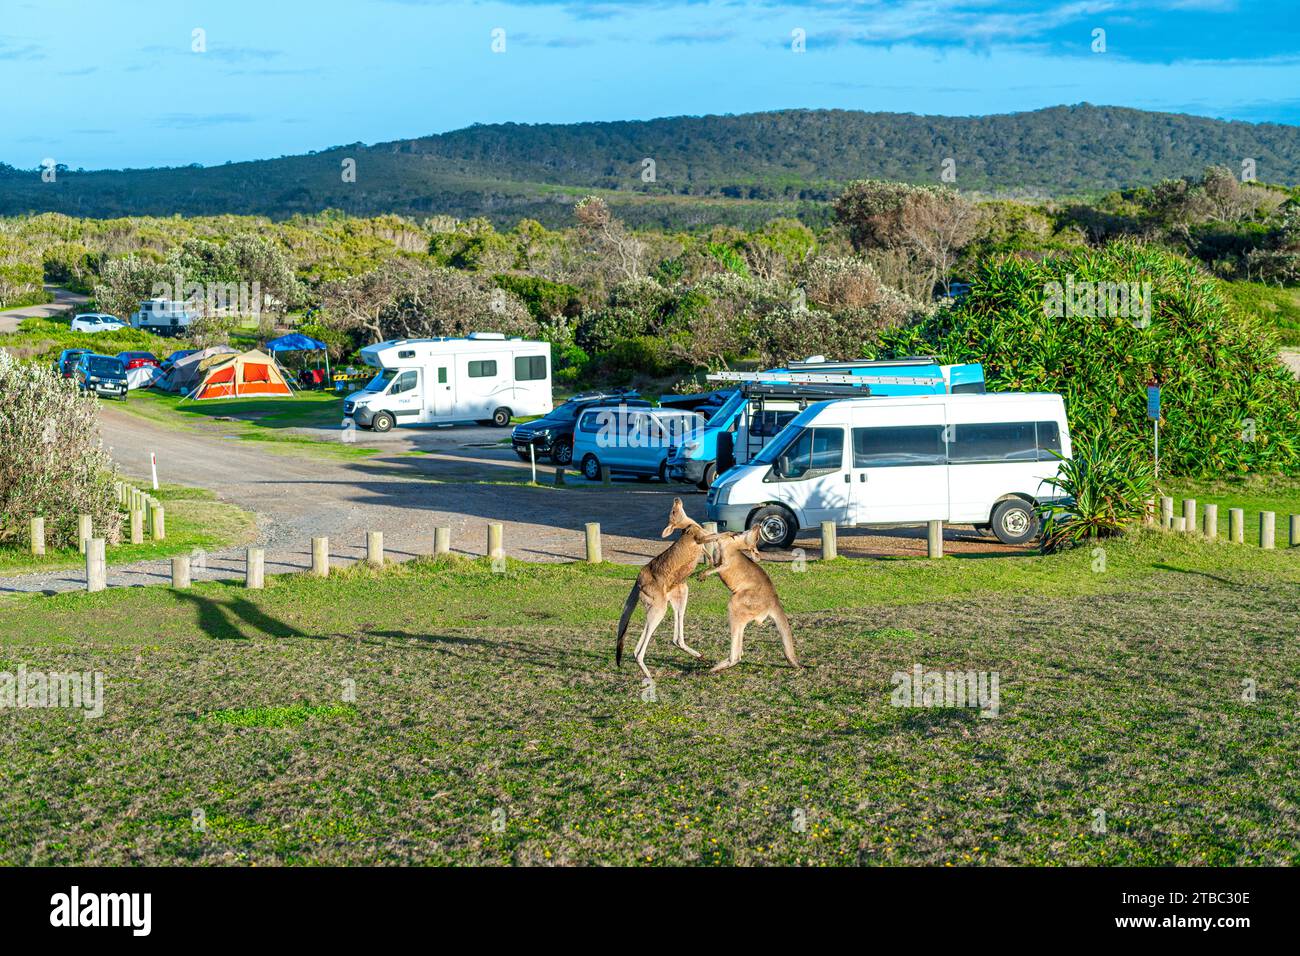 Two juvenile male eastern grey kangaroos playfighting on grass with parking area and campers in background, Yuraygir National Park, NSW Australia Stock Photo